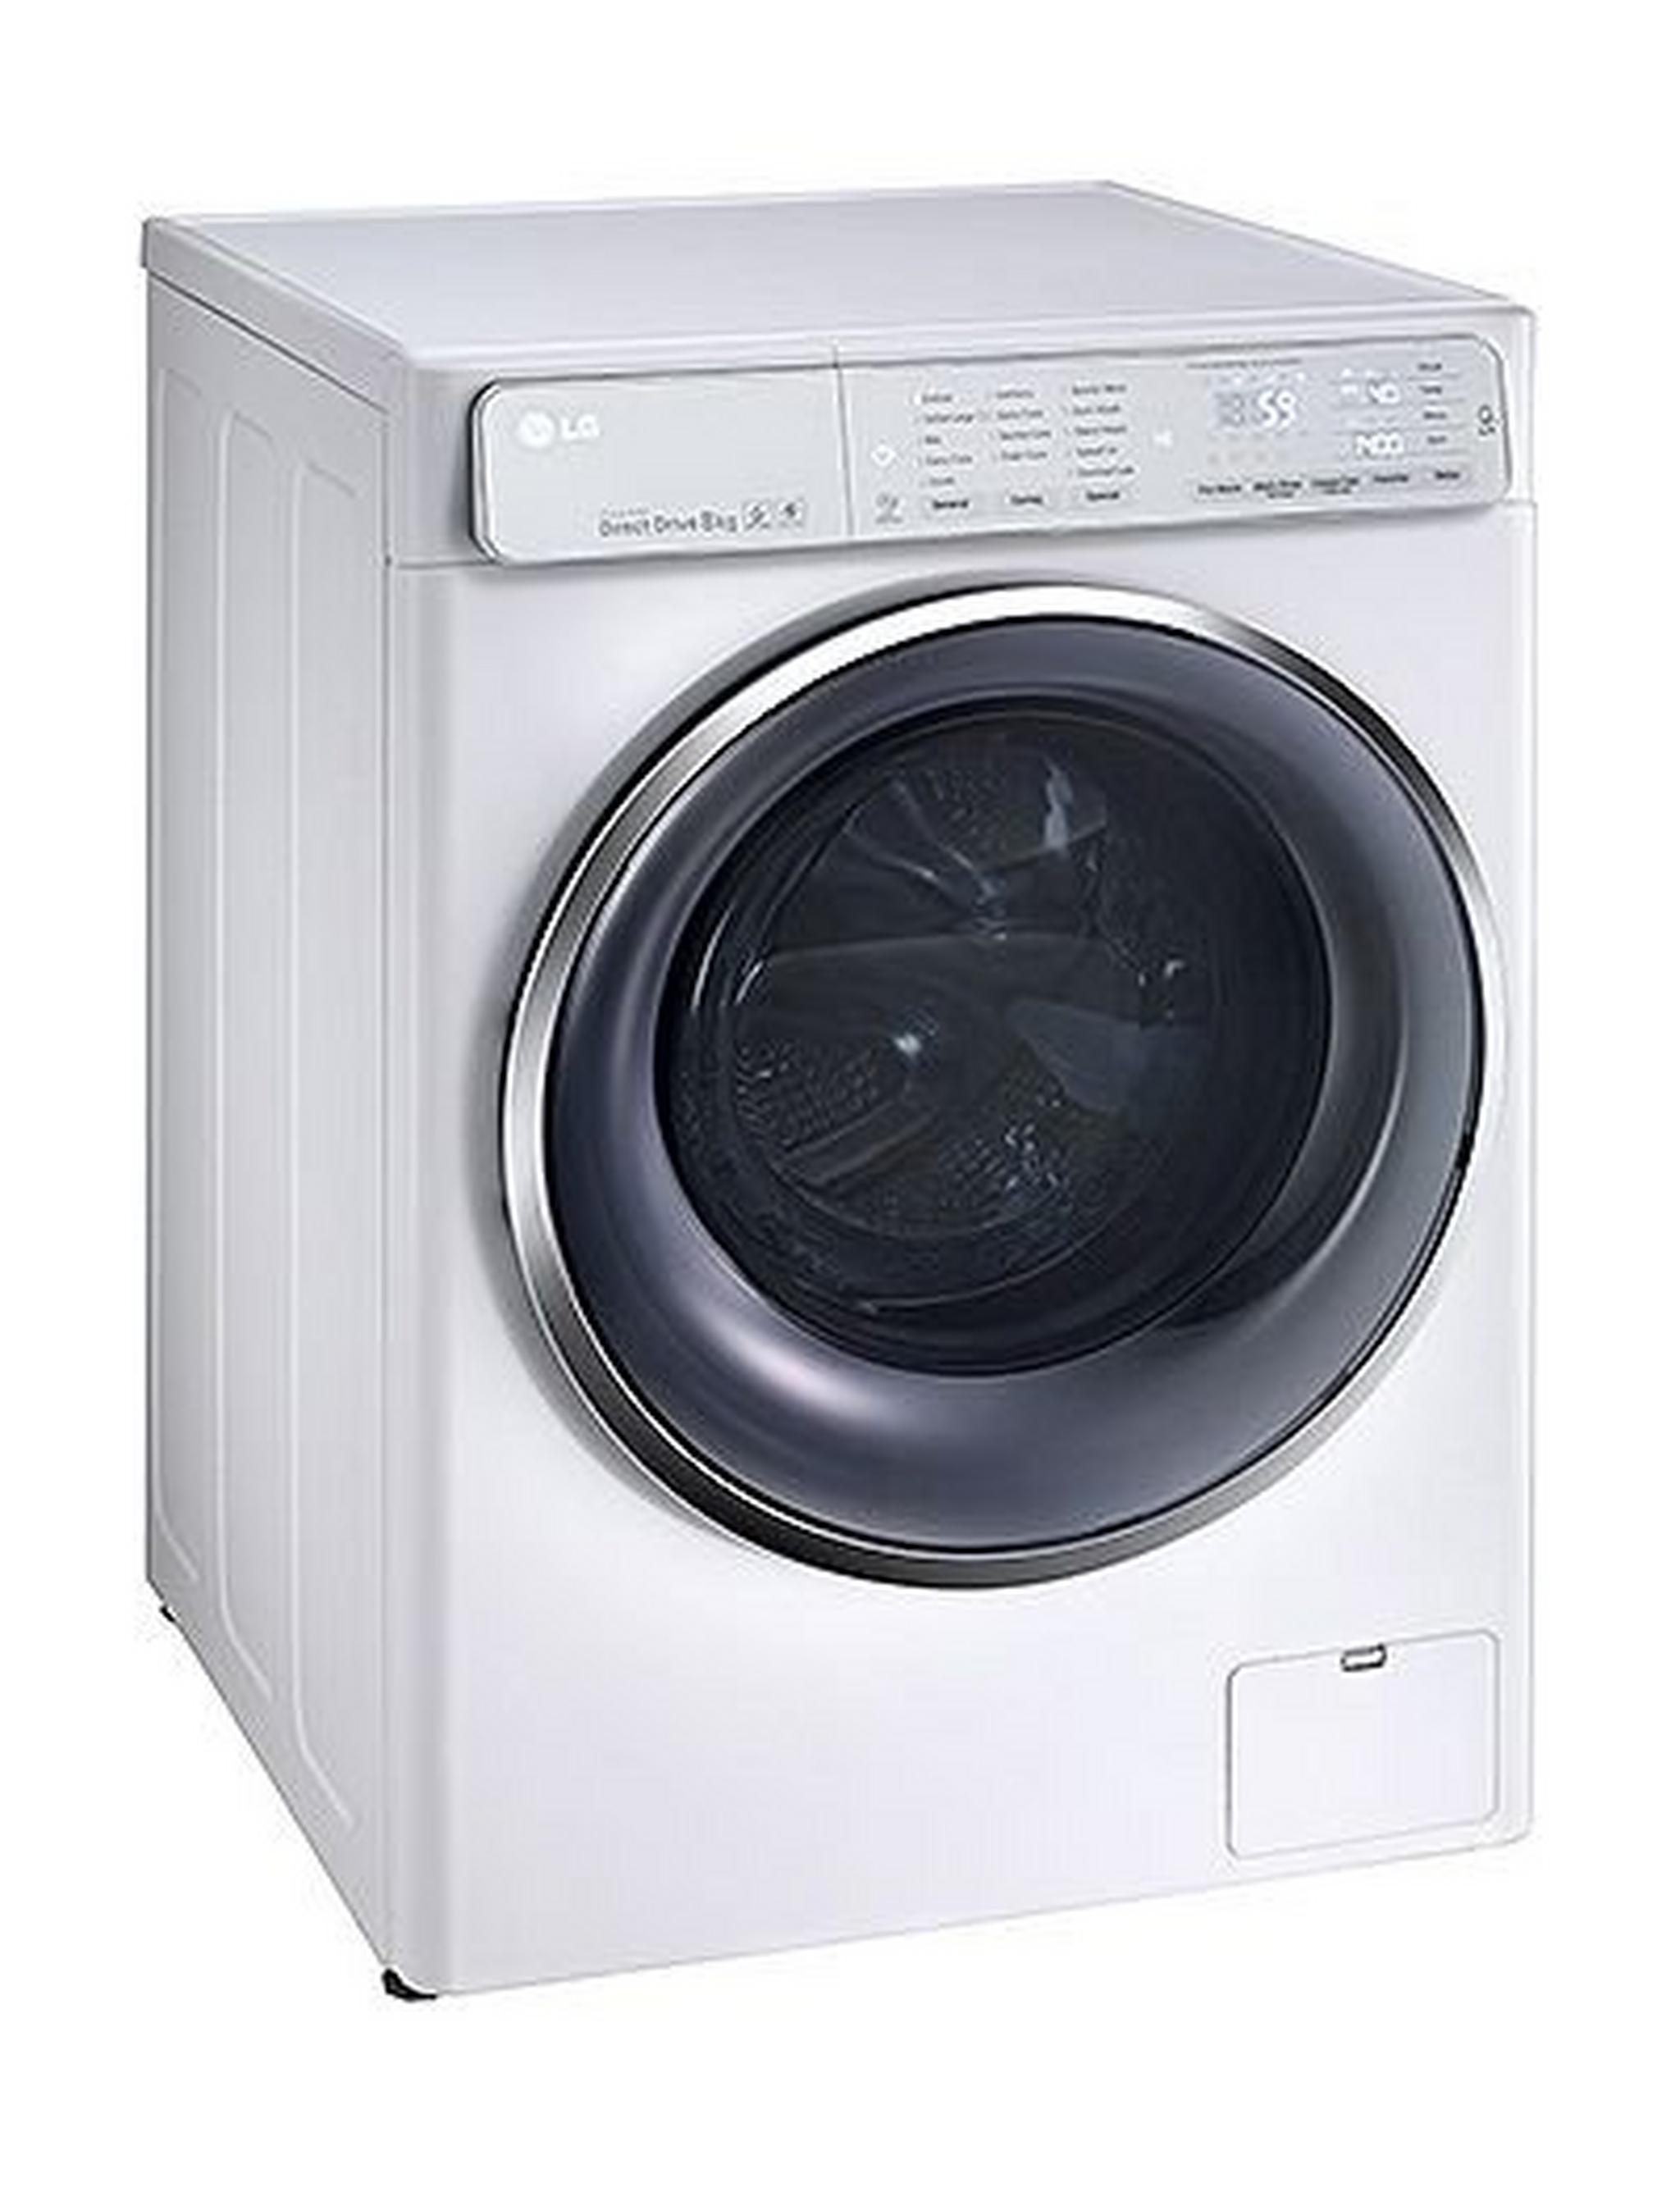 LG Front Load Washer/Dryer 9/6 KG (WS0906WH) - White